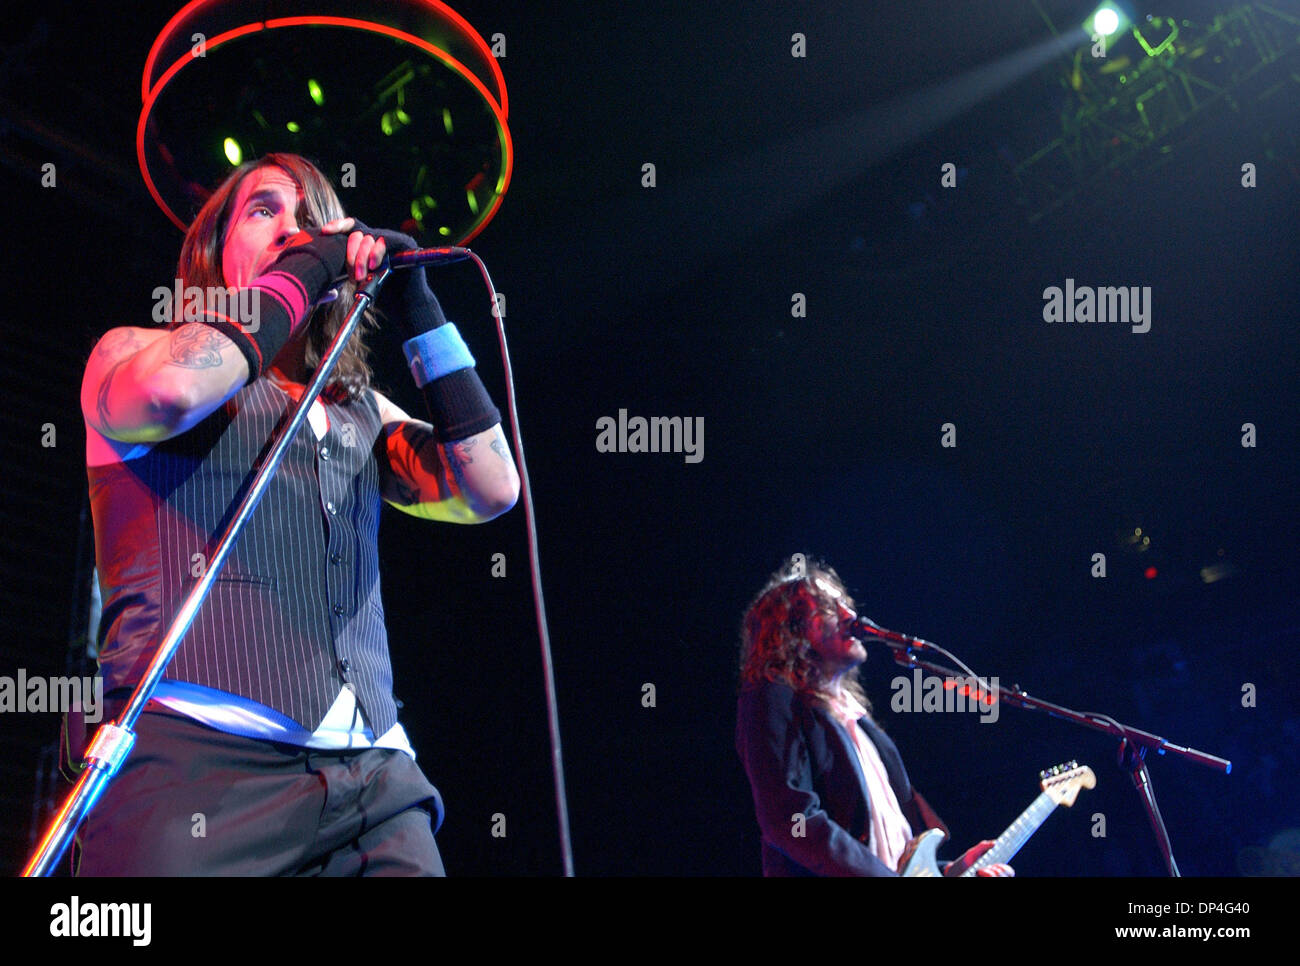 Aug 11, 2006; Portland, OR, USA; Red Hot Chili Pepper lead singer ANTHONY KIEDIS and musician/singer JOHN FRUSCIANTE during a concert in the Rose Garden Arena in Portland. The Red Hot Chili Peppers are touring in support of their recent album Stadium Arcadium. Mandatory Credit: Photo by Bill Putnam/ZUMA Press. (©) Copyright 2006 by Bill Putnam Stock Photo